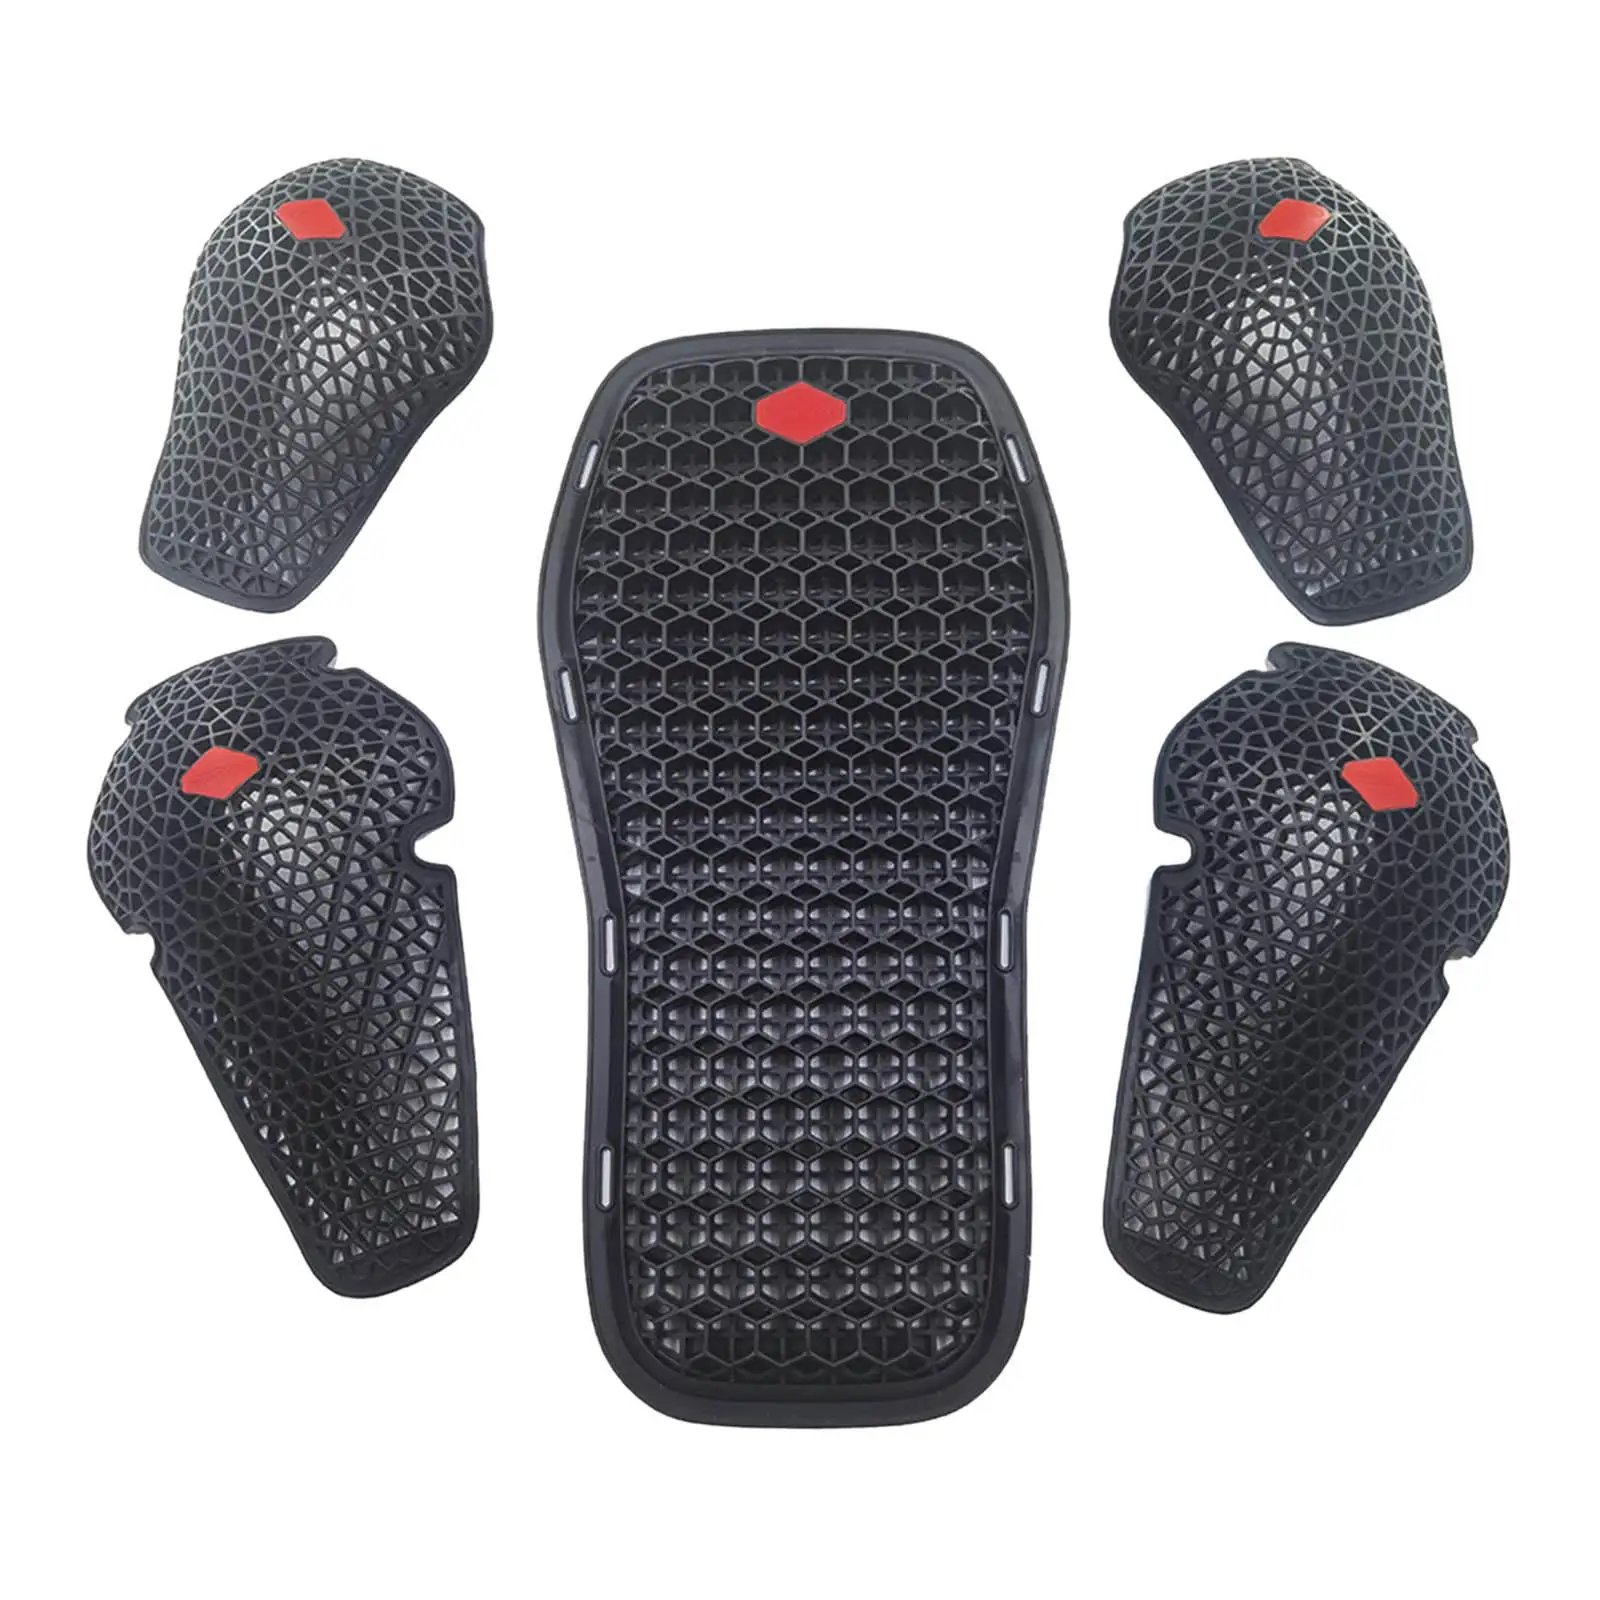 5Pcs Motorcycle Armor Protector Cycling Breathable Equipment Protector Kit